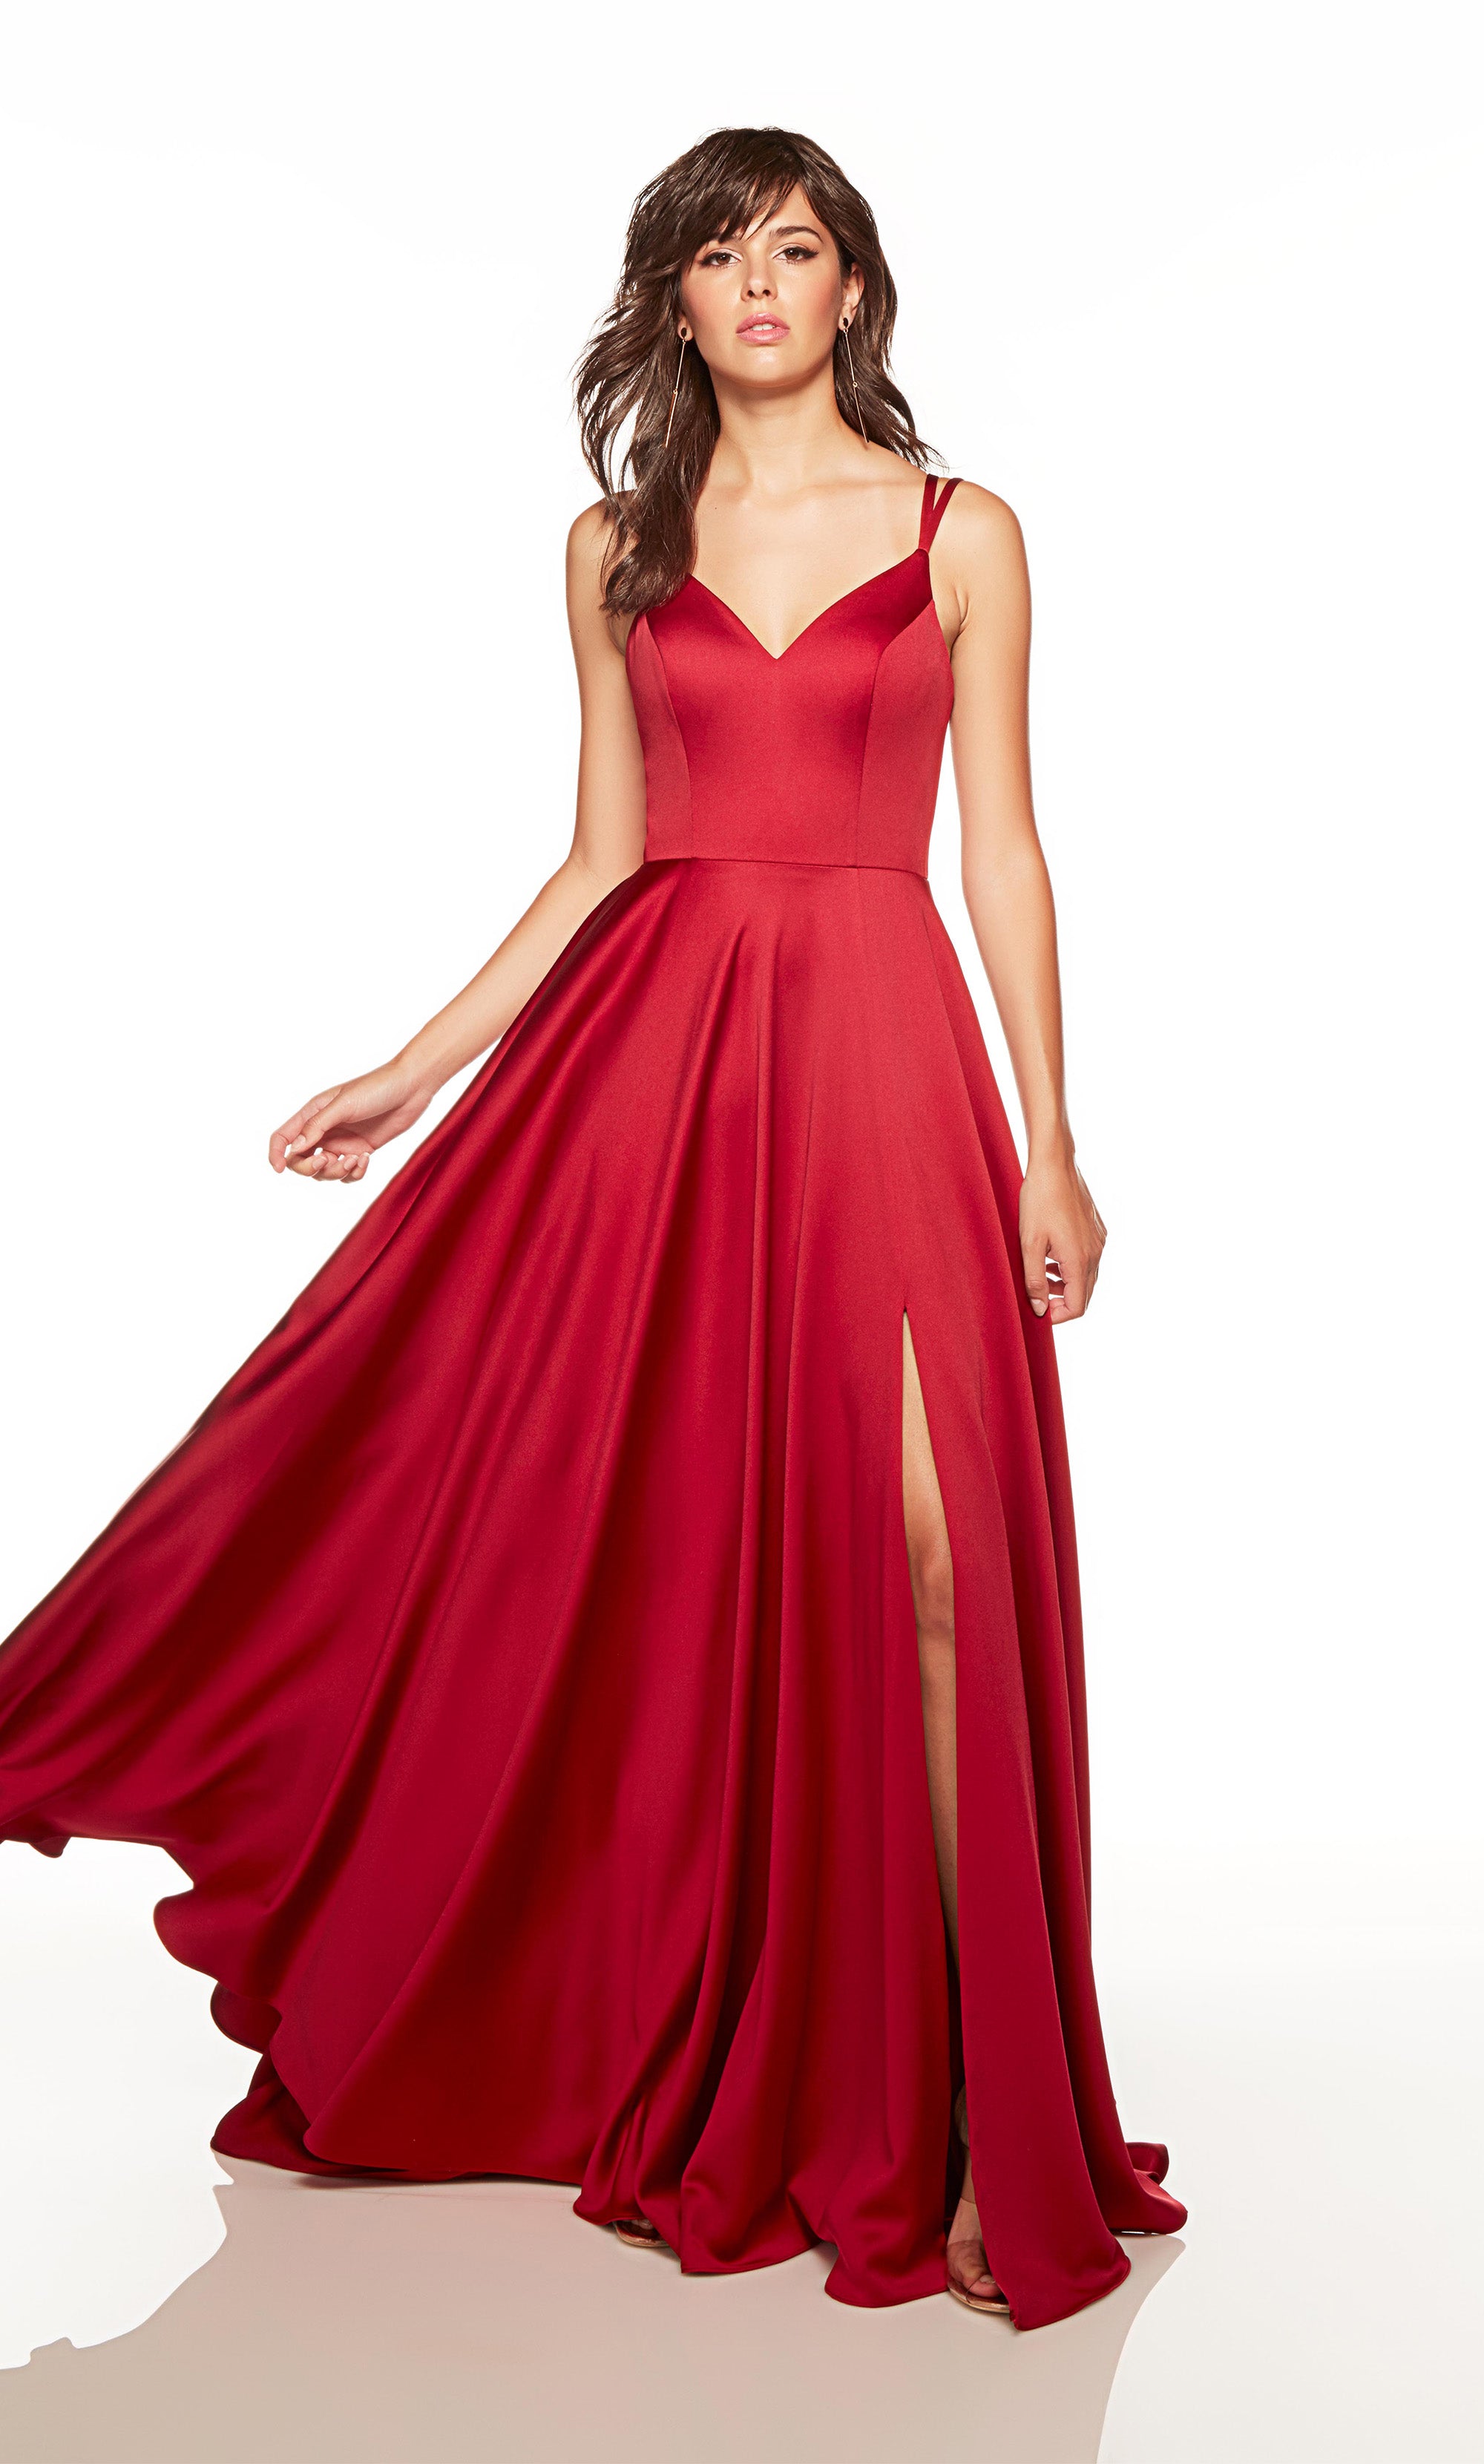 Red A-line Prom Gown with Pockets,Satin Long Prom Dress,Modest Evening -  Wishingdress